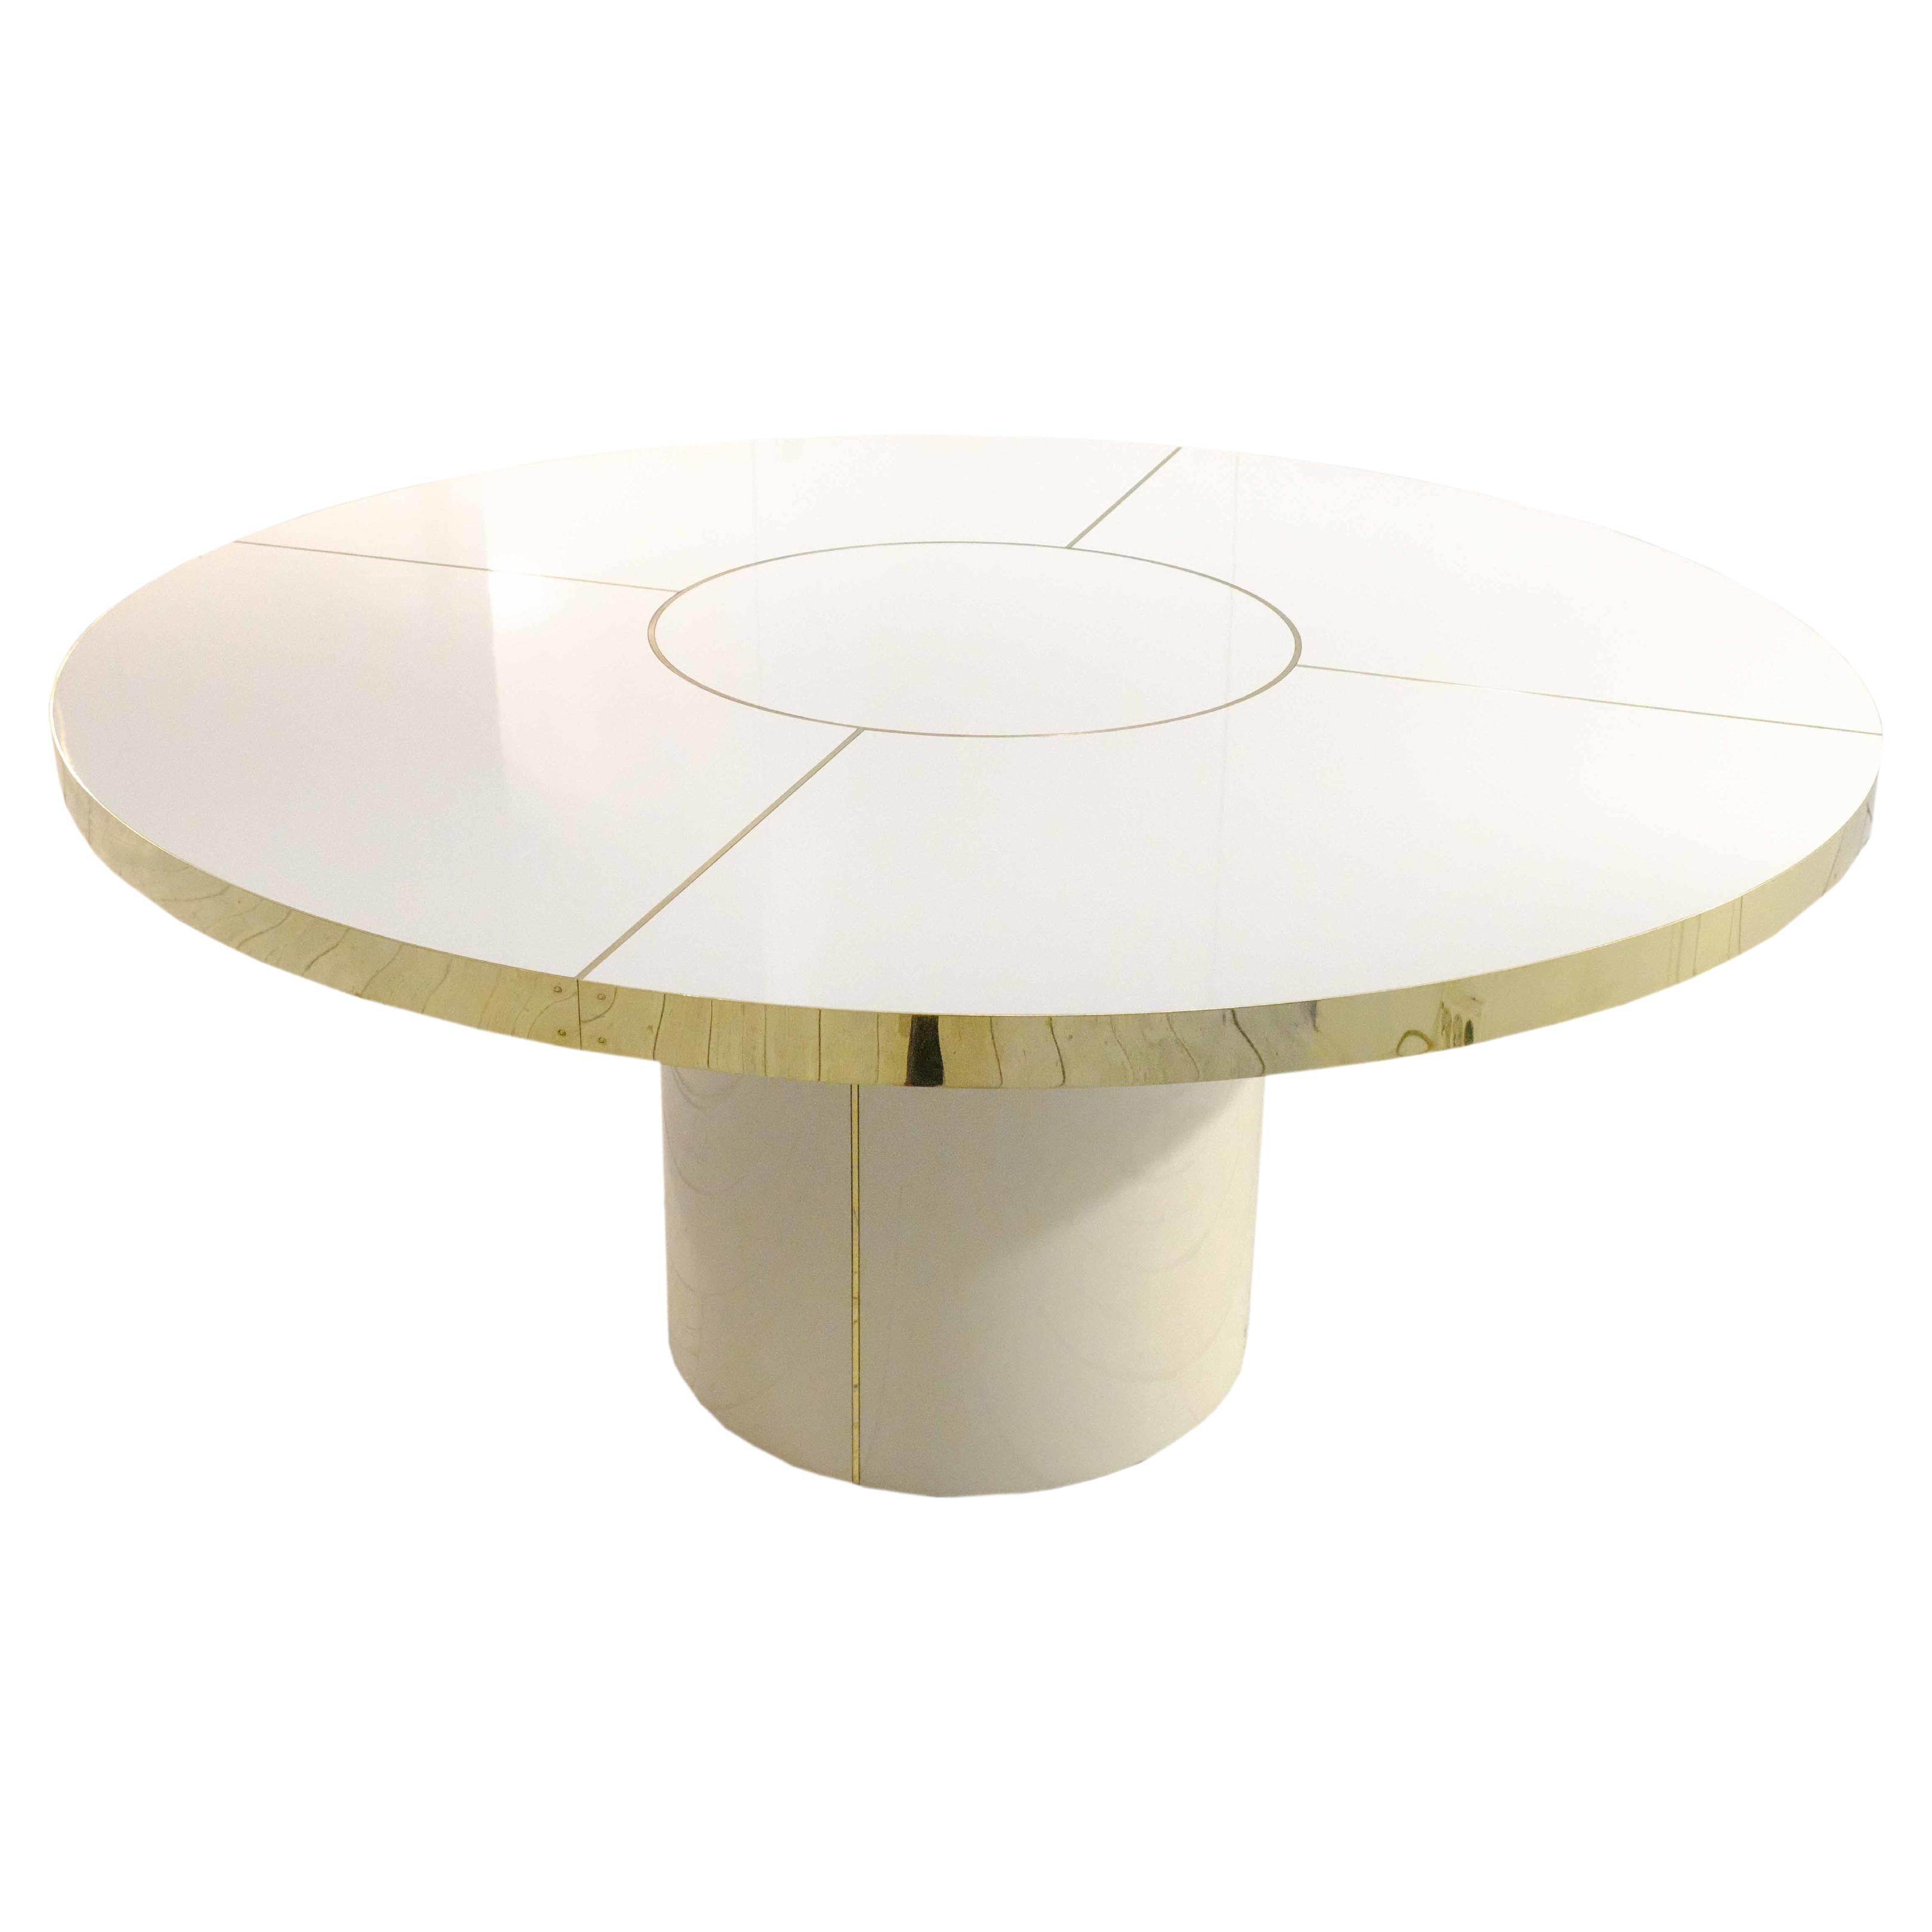 Retro Design Round Dining Table Palm Springs Style High GlossLaminated&Brass XXL For Sale